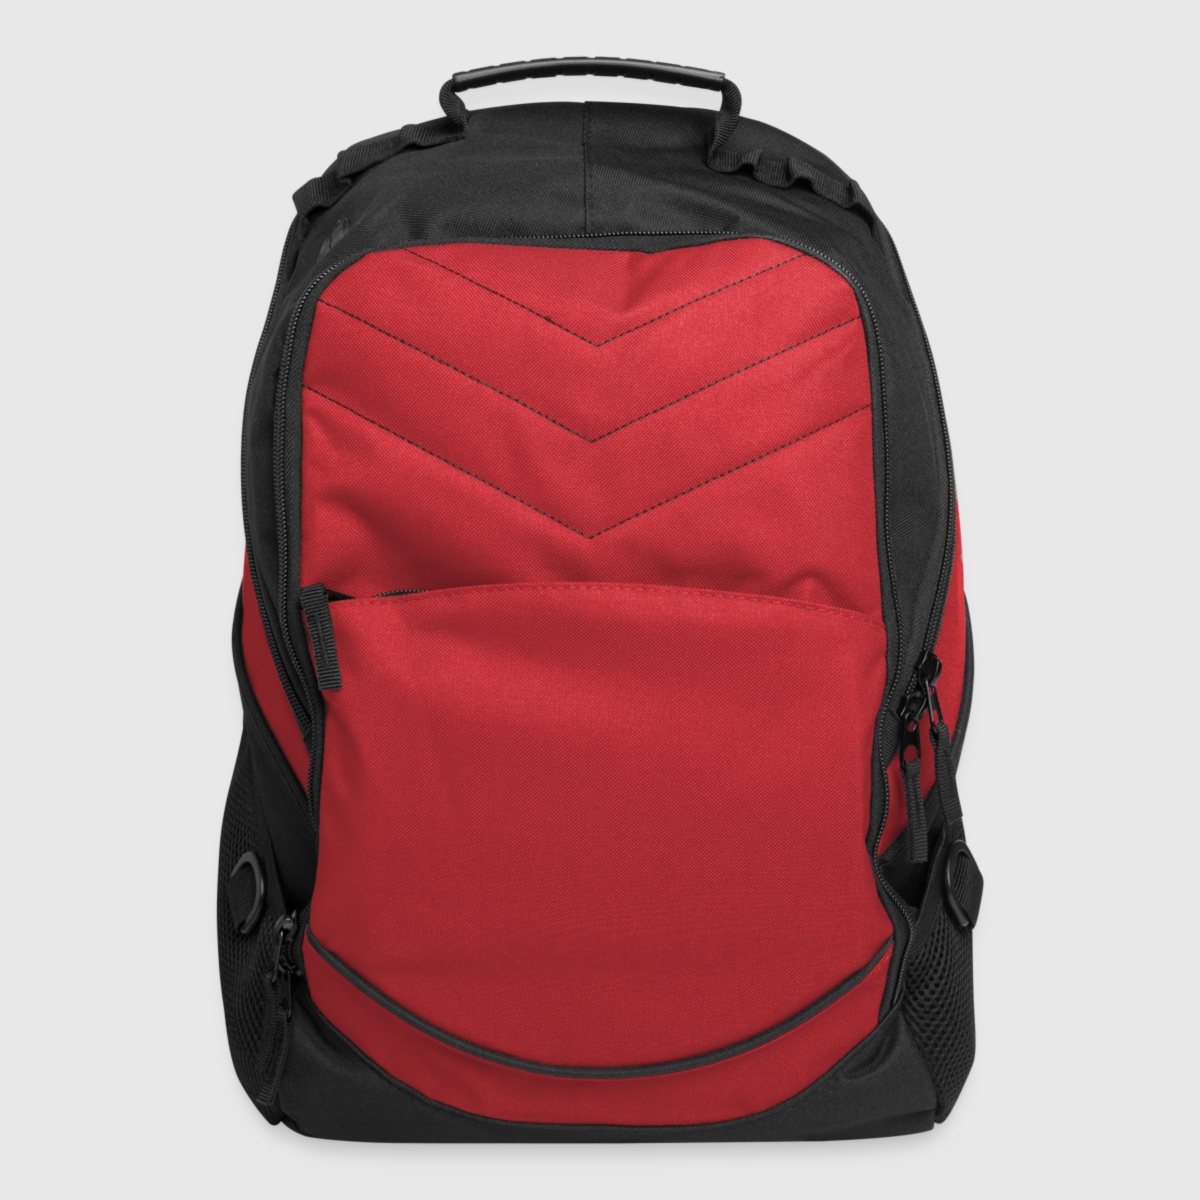 Computer Backpack - Front